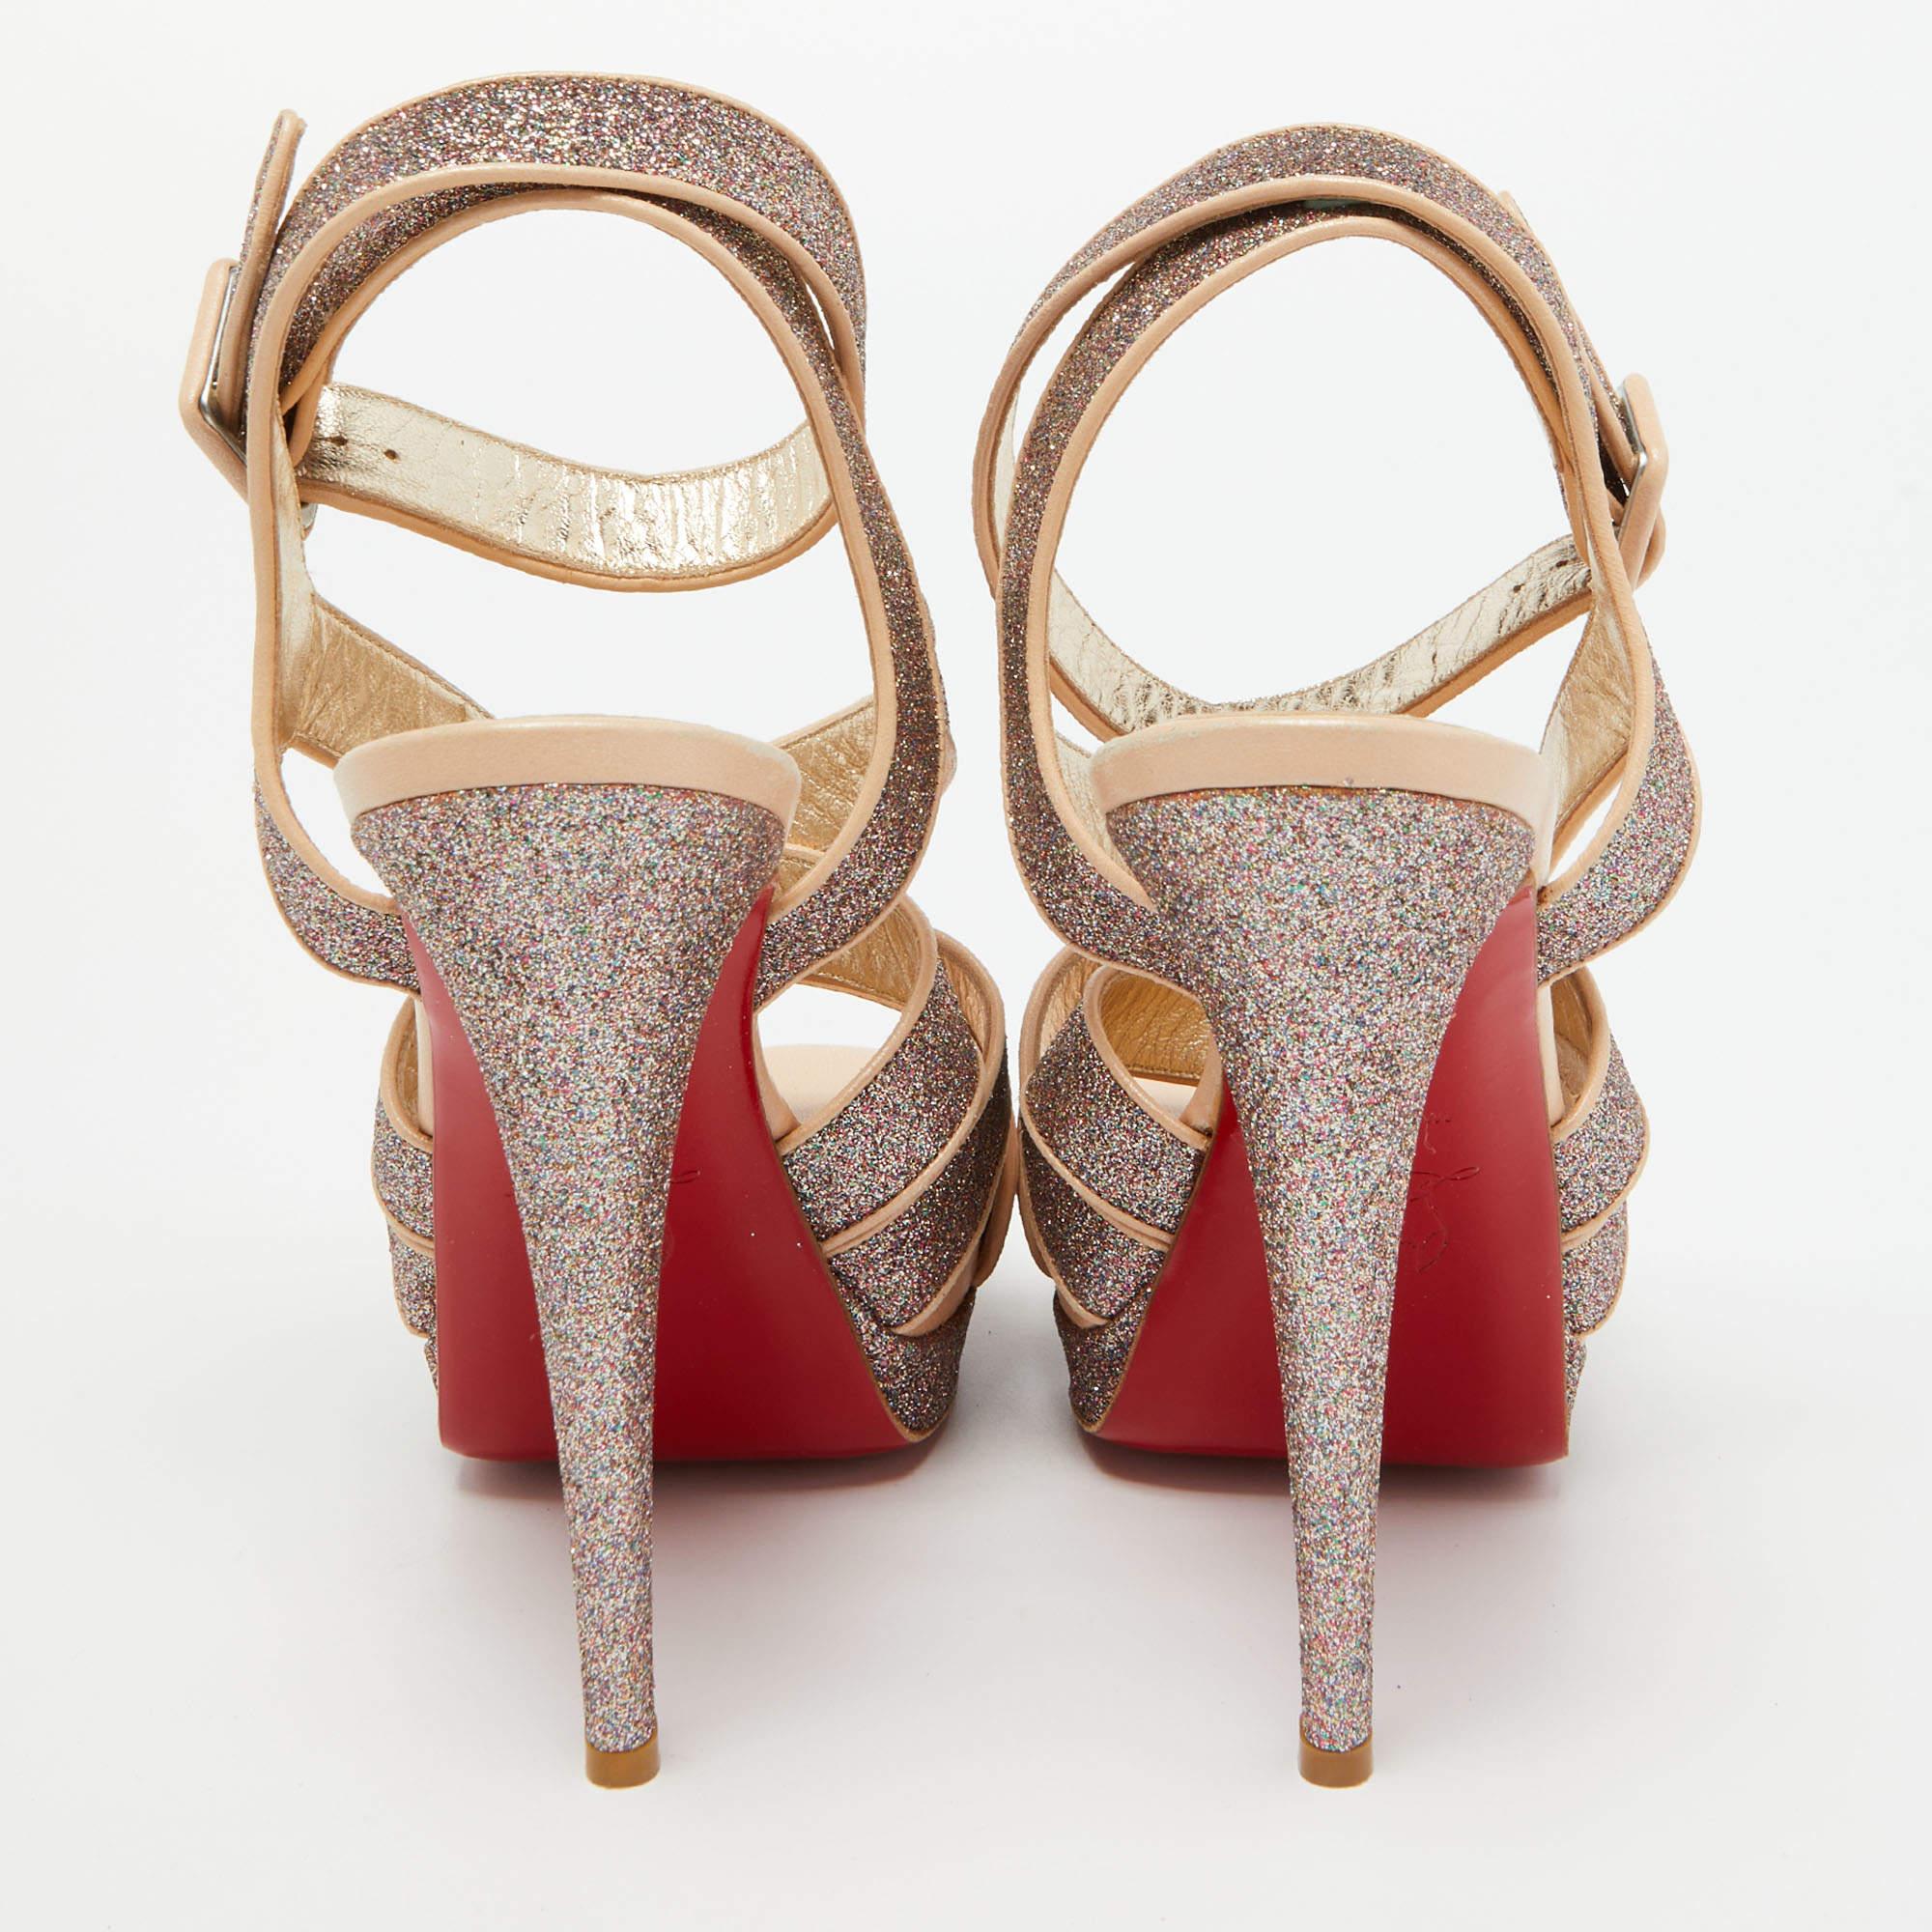 These Christian Louboutin sandals will frame your feet in an elegant manner. Crafted from quality materials, they flaunt a classy display, comfortable insoles & durable heels.

